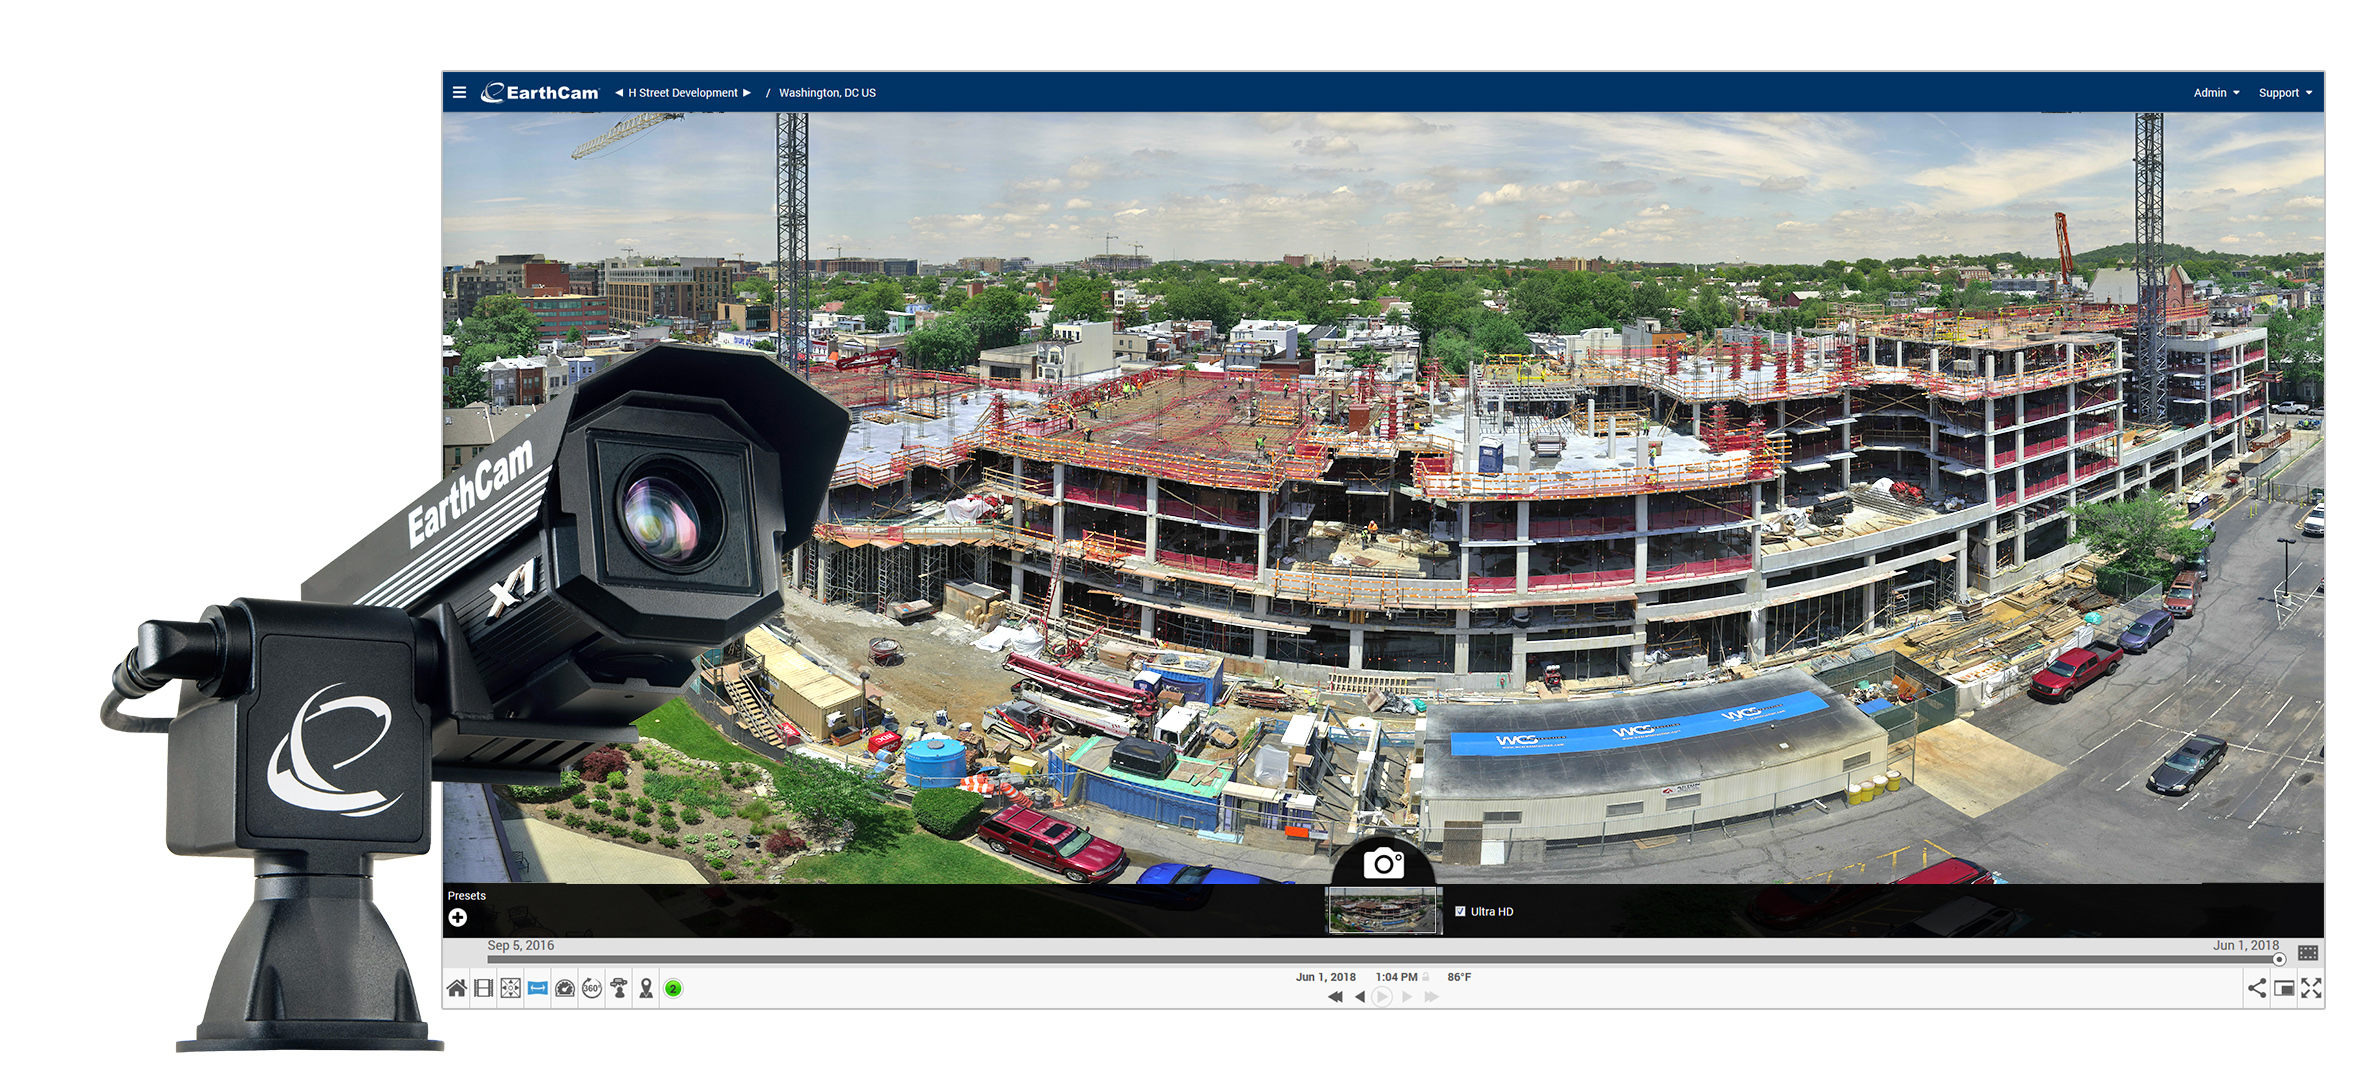 With support for H.265, EarthCam clients will have quicker access to significantly higher quality video streams, while utilizing substantially less data throughout the process.